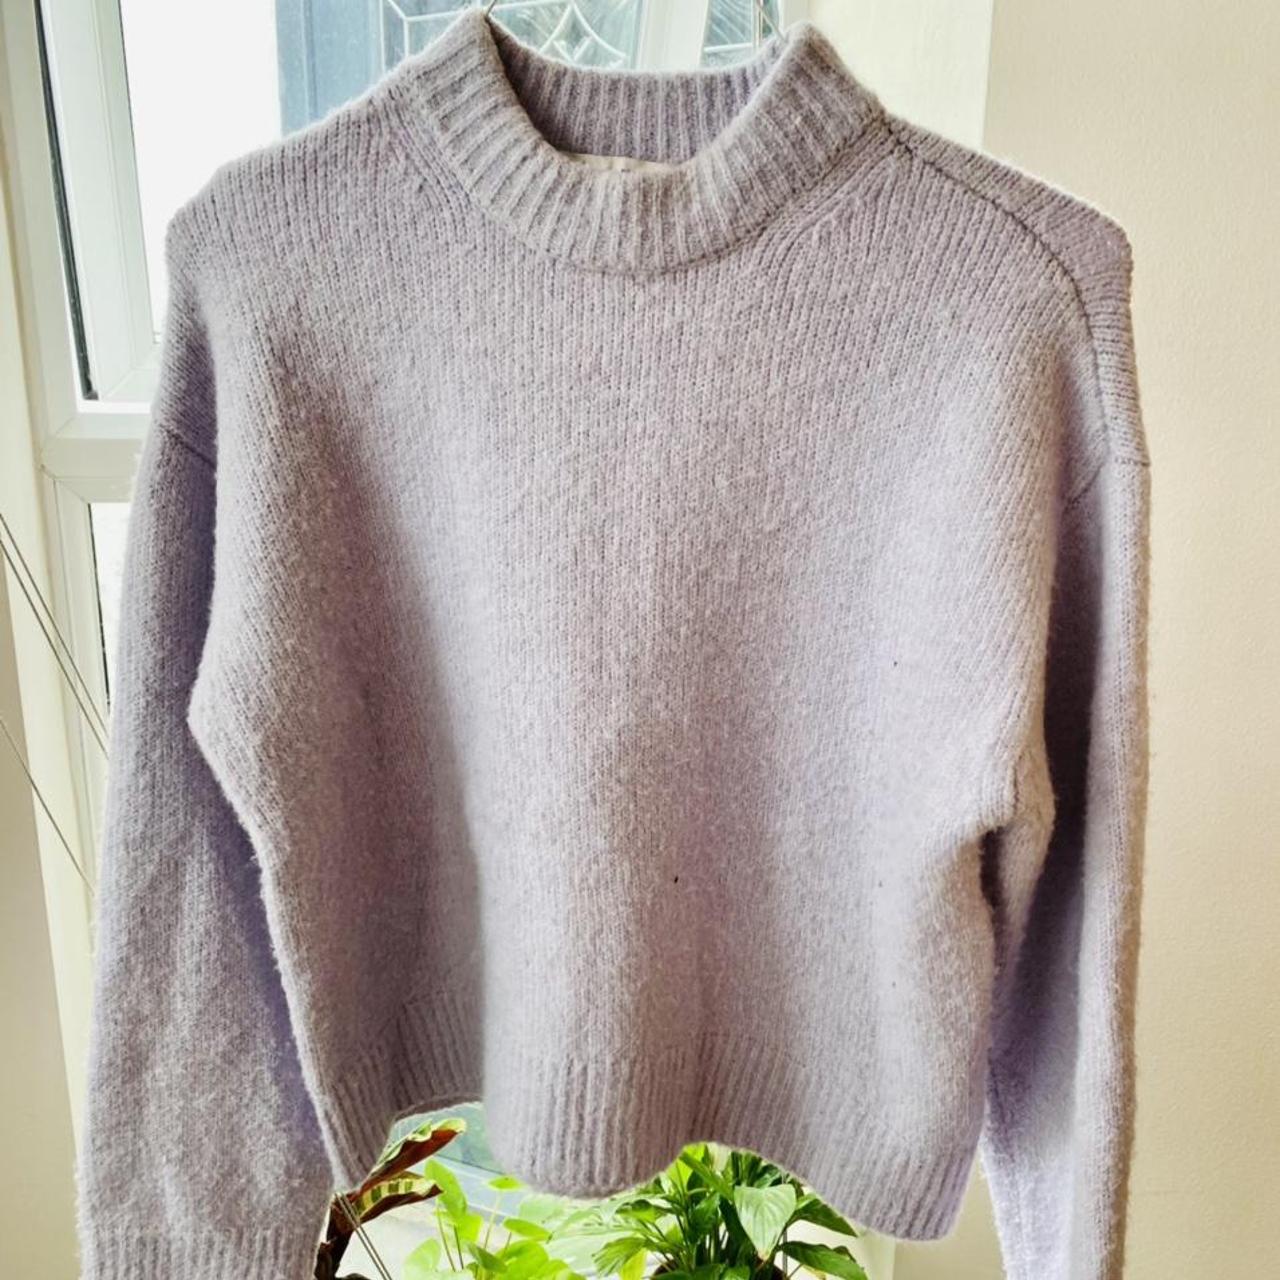 Product Image 1 - ZARA LILAC KNIT SWEATER

excellent condition